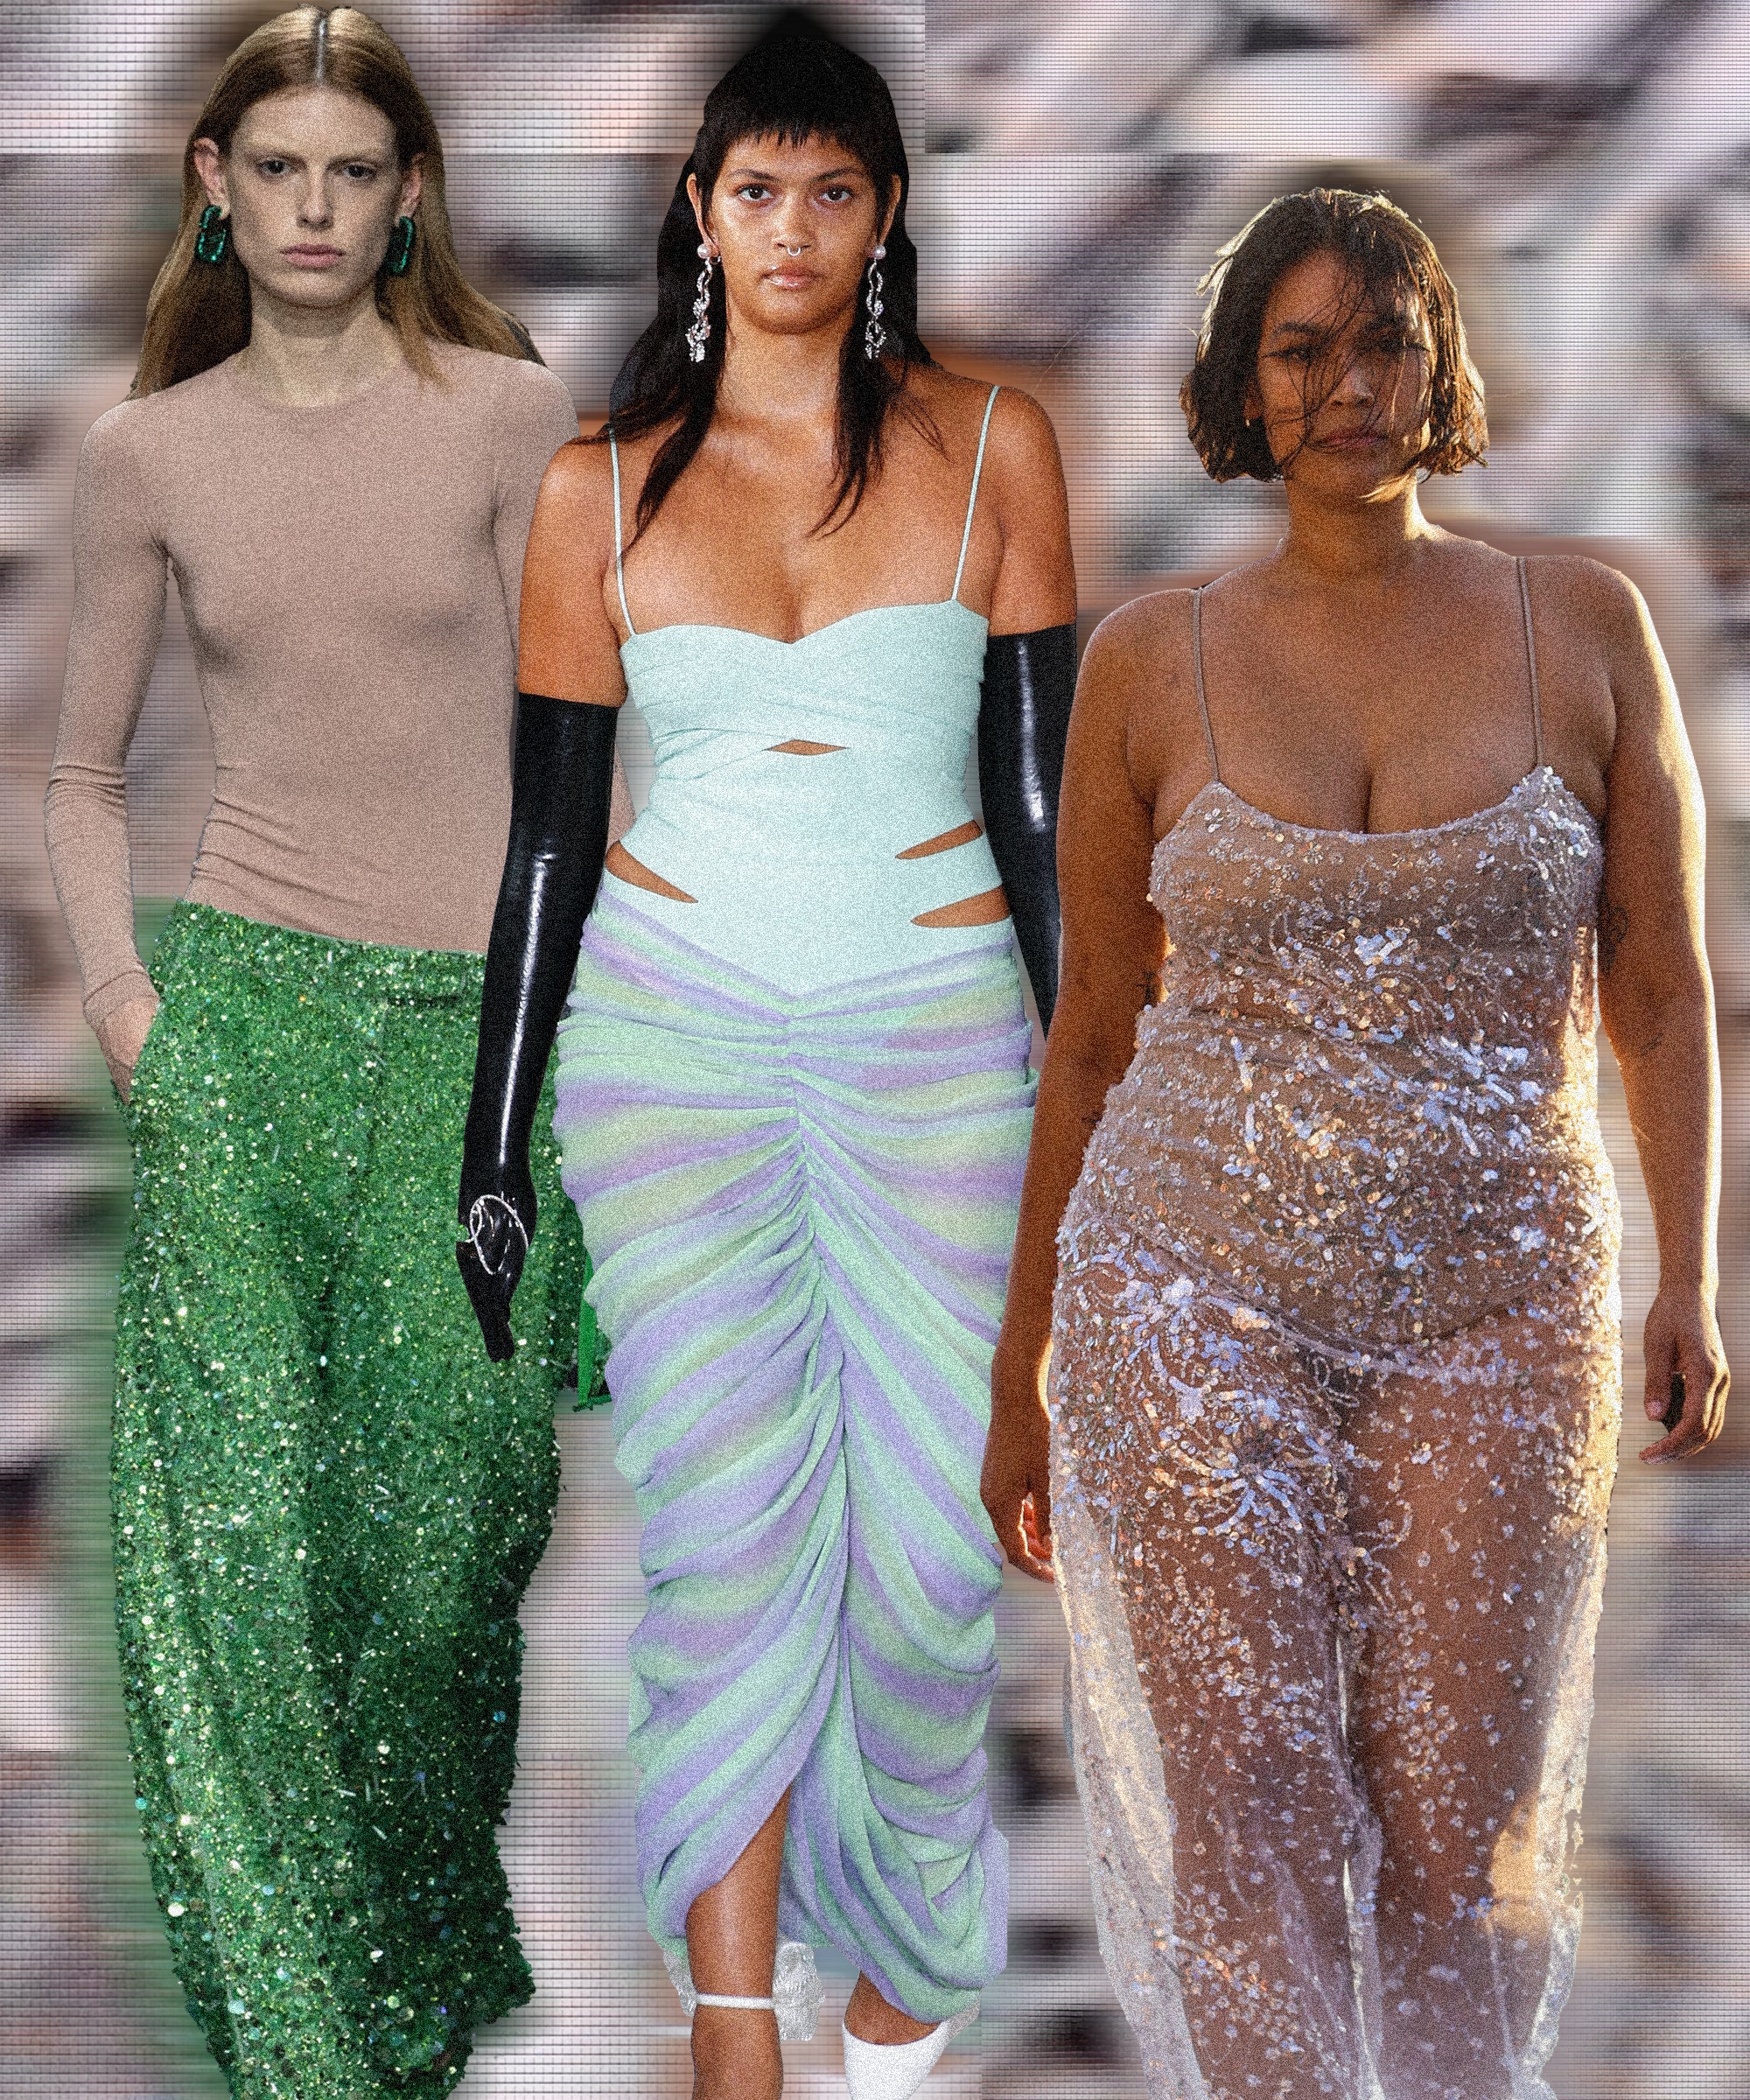 10 Top Fashion Trends For Spring/Summer 2023